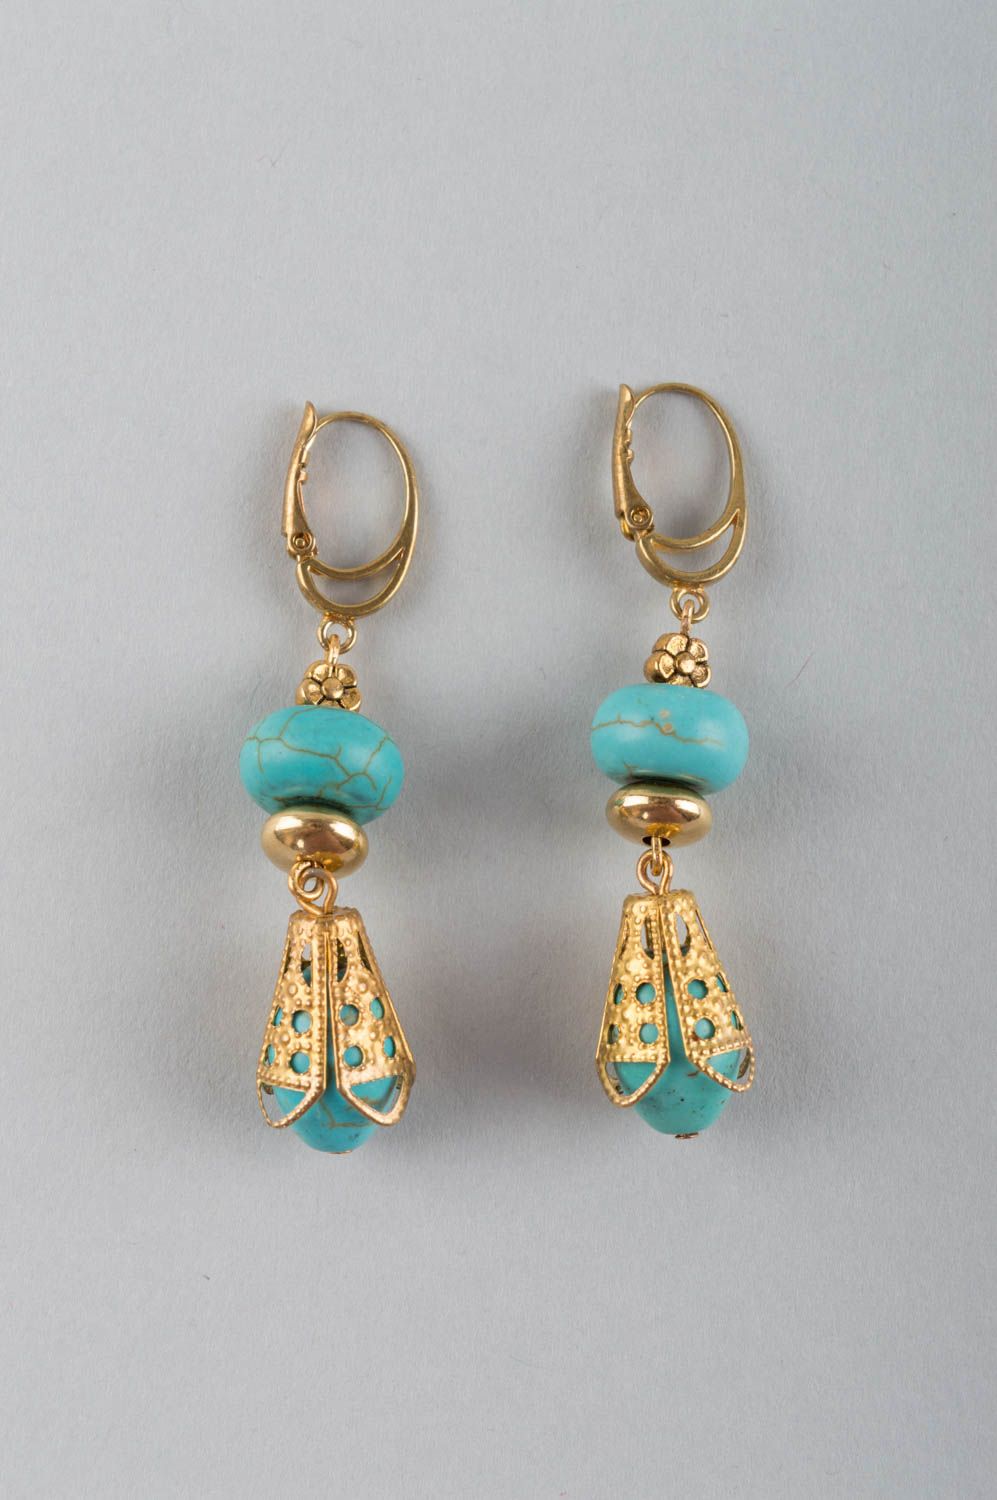 Handmade accessory made of natural stones earrings made of turquoise and brass photo 2